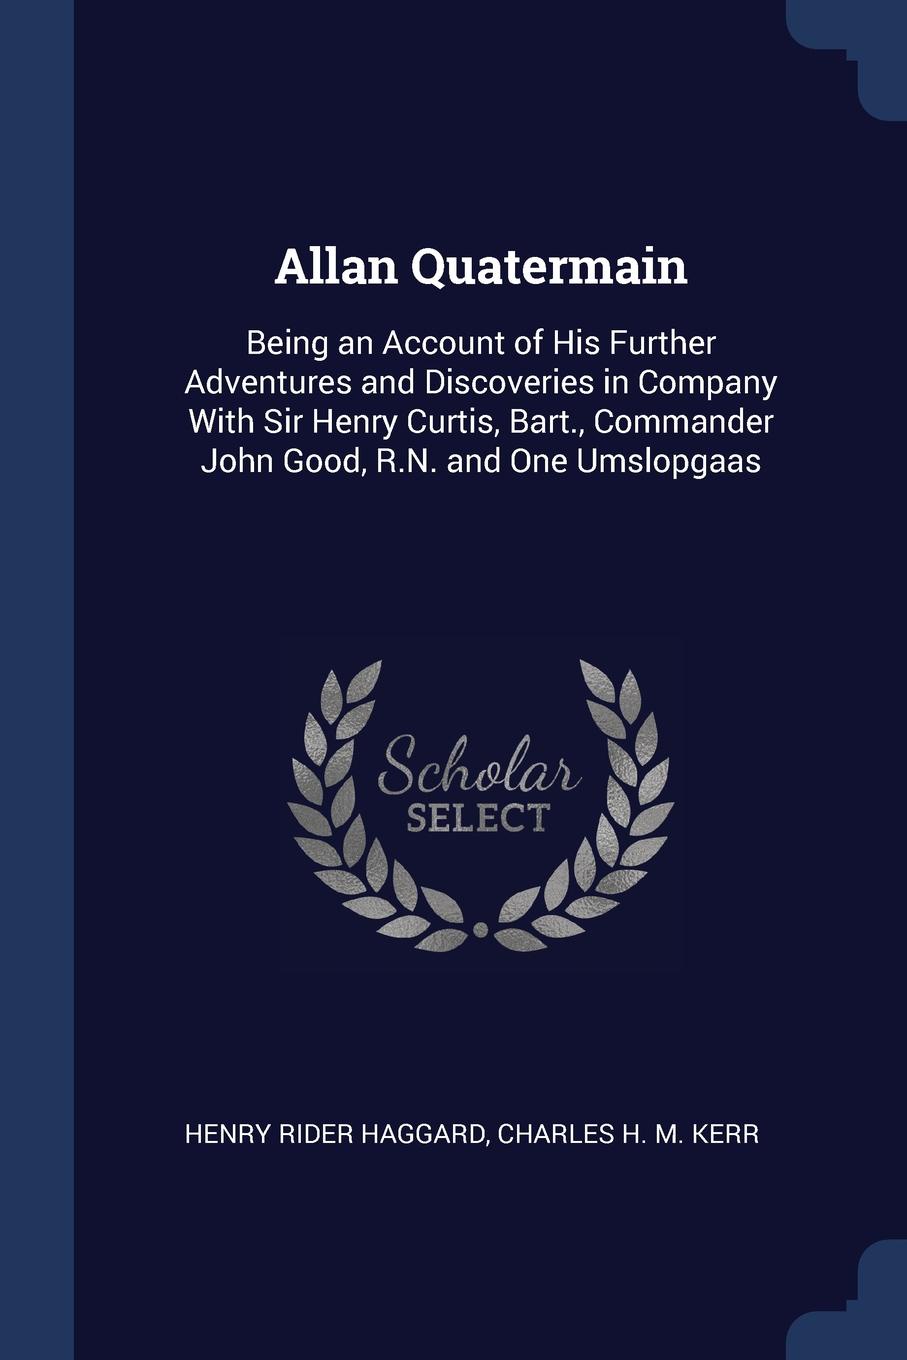 Allan Quatermain. Being an Account of His Further Adventures and Discoveries in Company With Sir Henry Curtis, Bart., Commander John Good, R.N. and One Umslopgaas